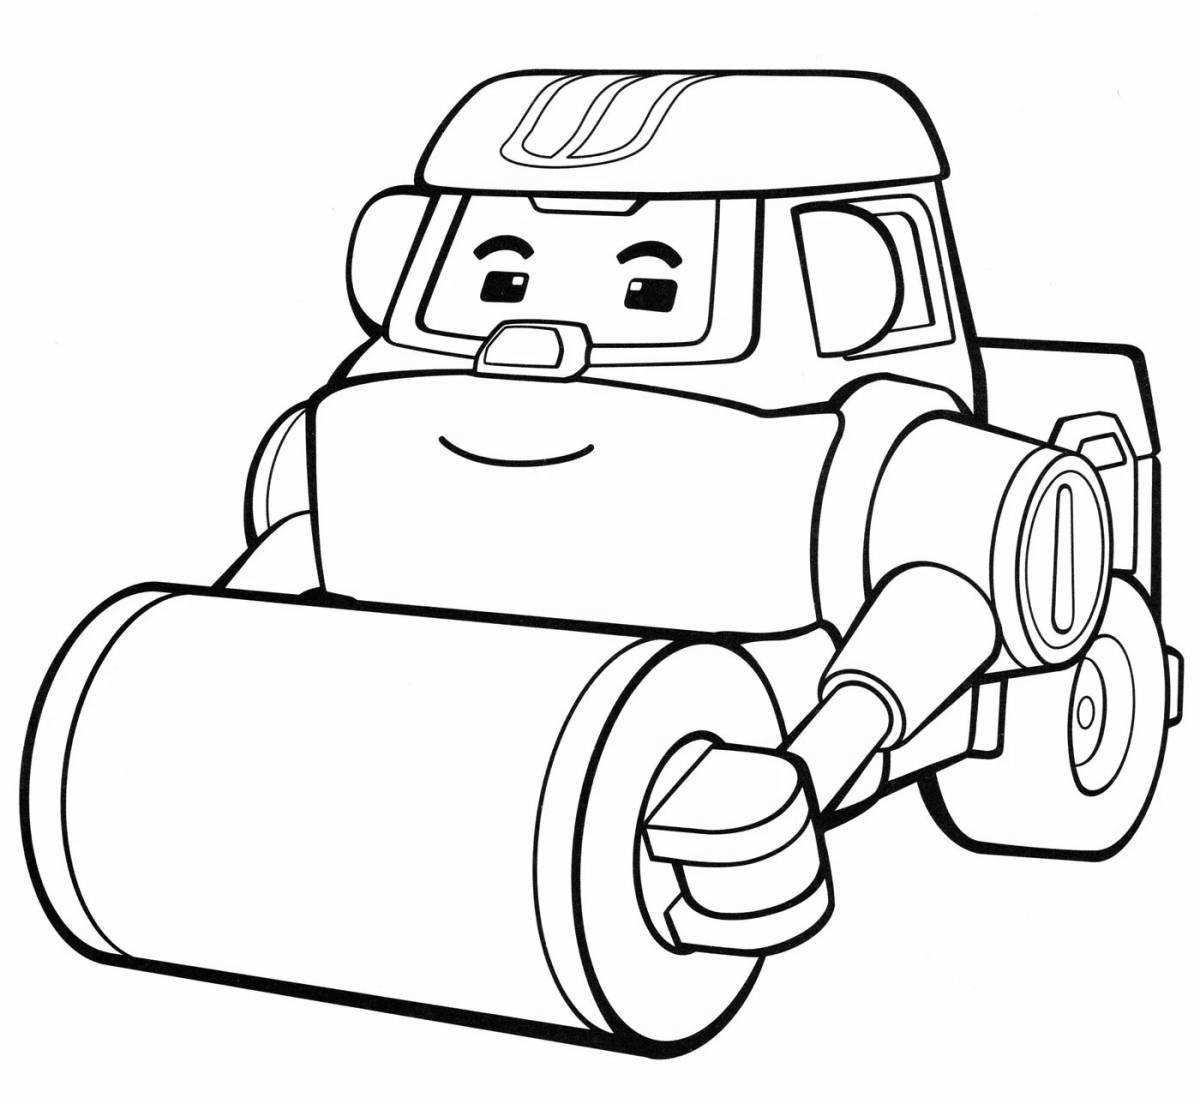 Coloring pages with colorful cartoon cars